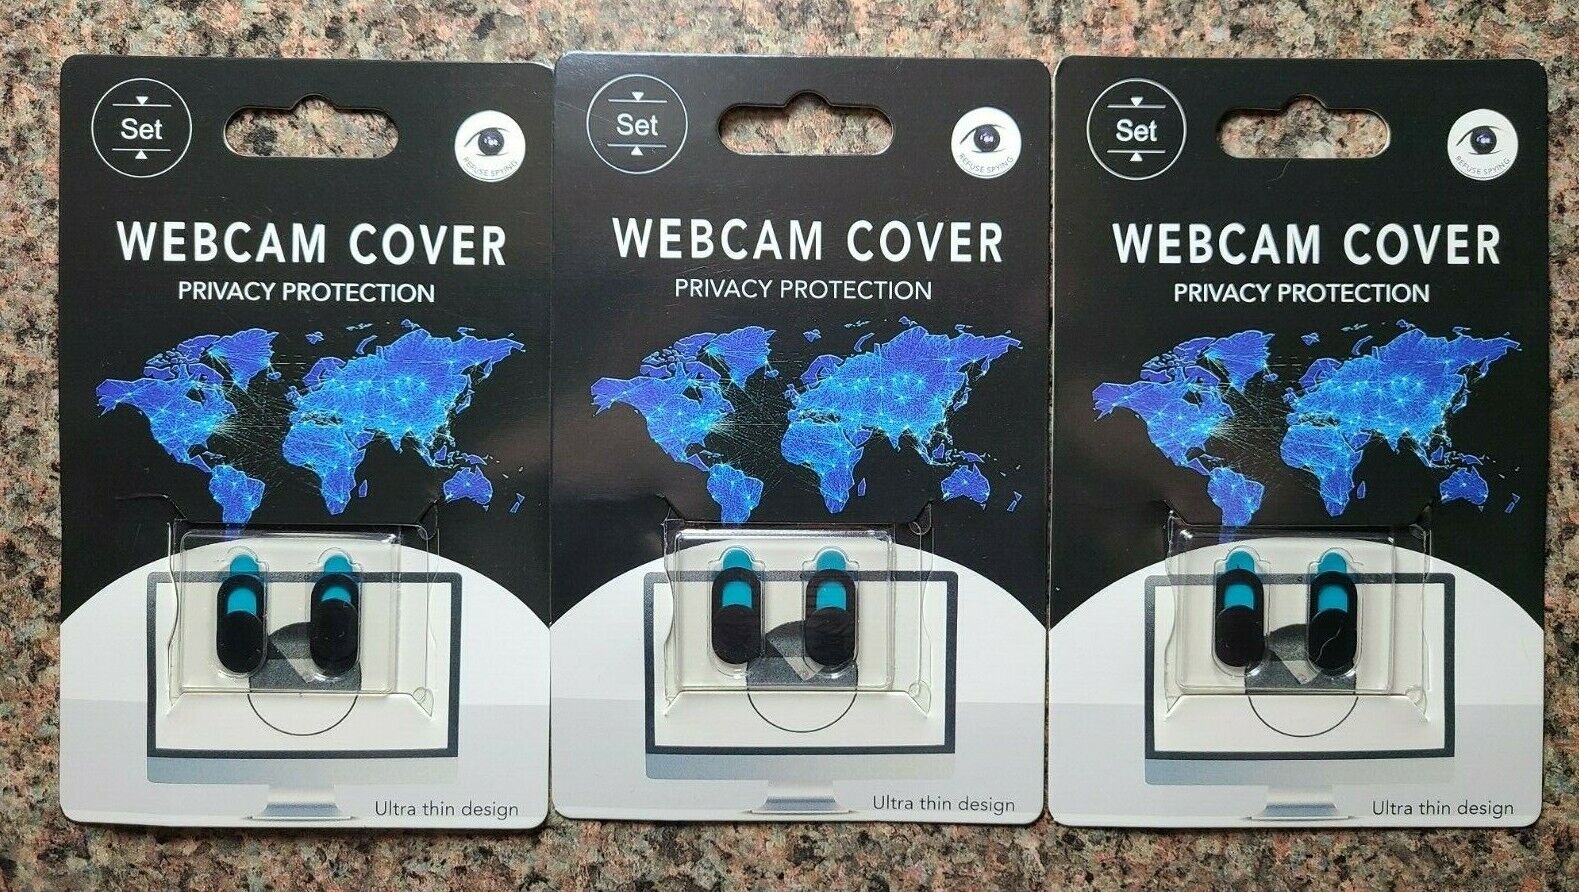 6 Pack - Webcam Covers - Retail Packaging - NiB Privacy Shield - Refuse Spying